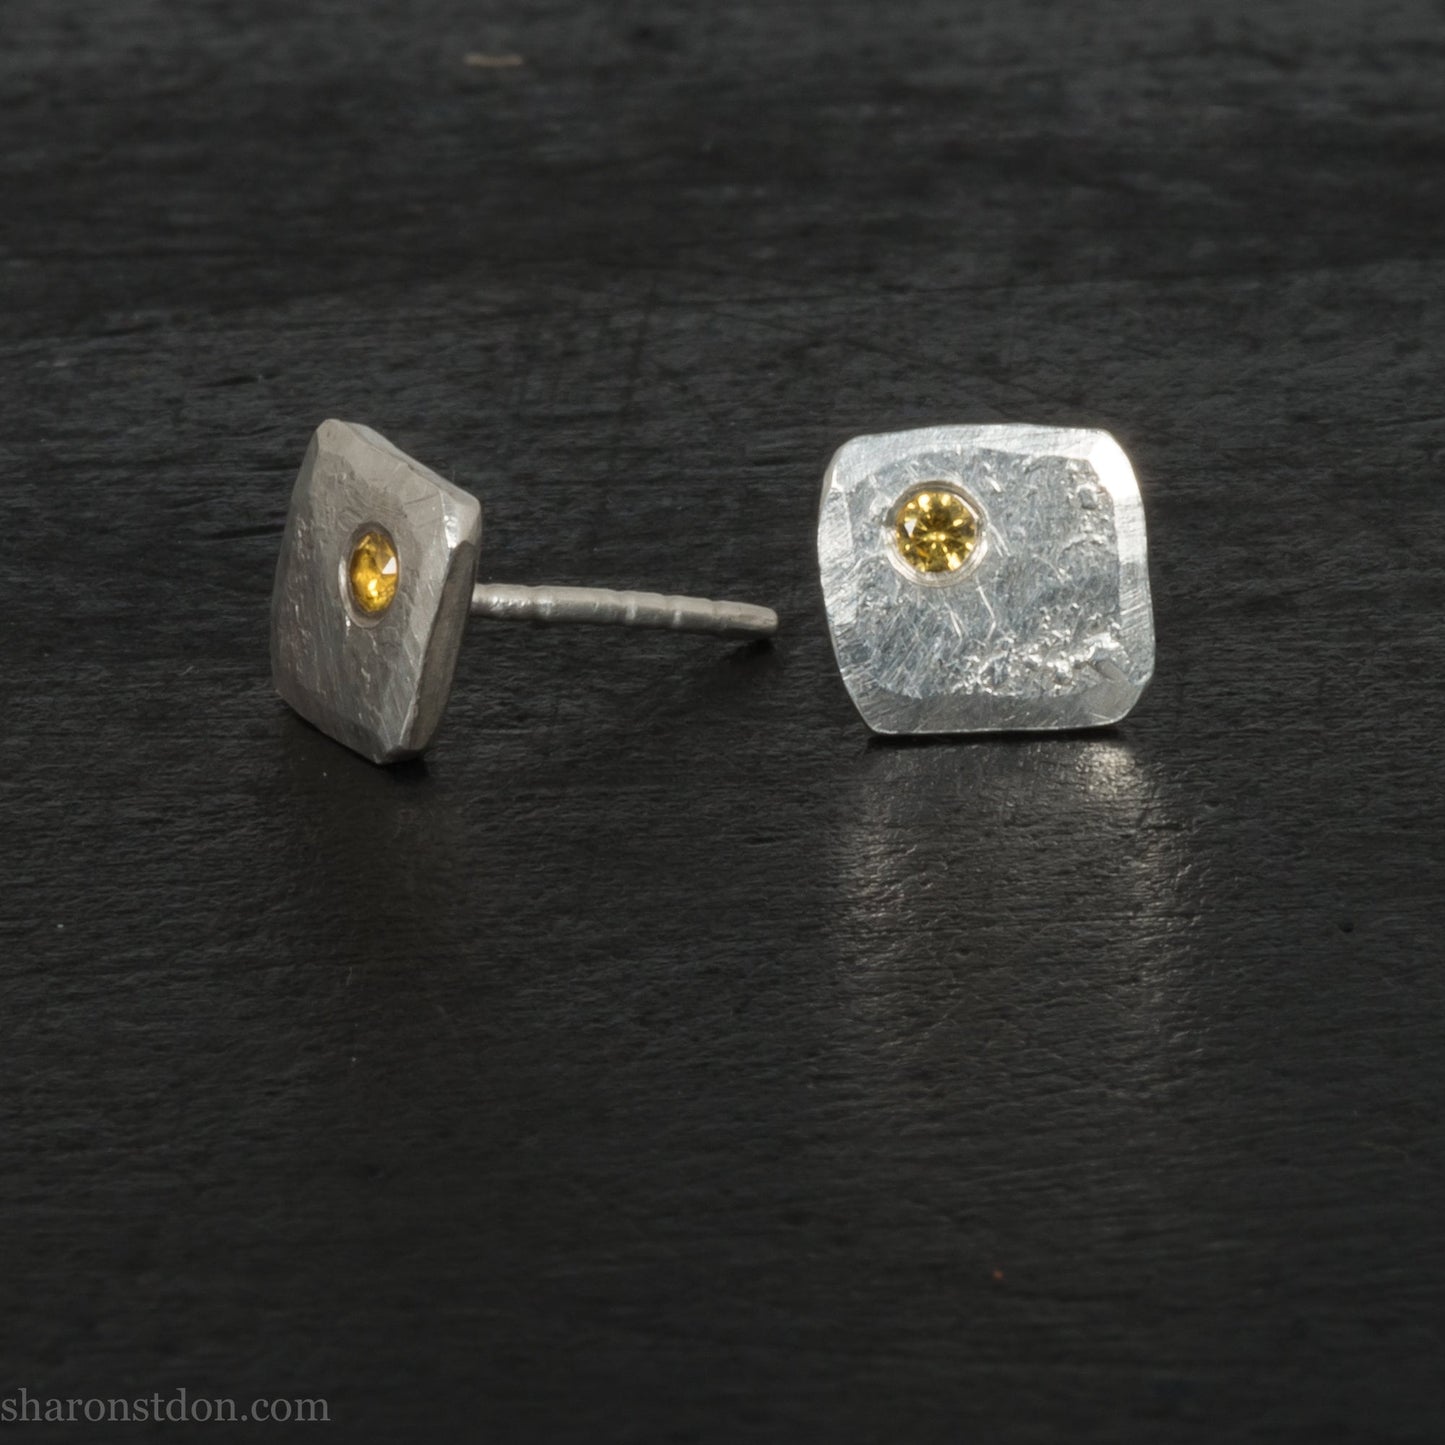 Canary yellow diamond gemstone stud earrings for men or women. Handmade 925 sterling silver squares stud earrings made by Sharon SaintDon in North America.